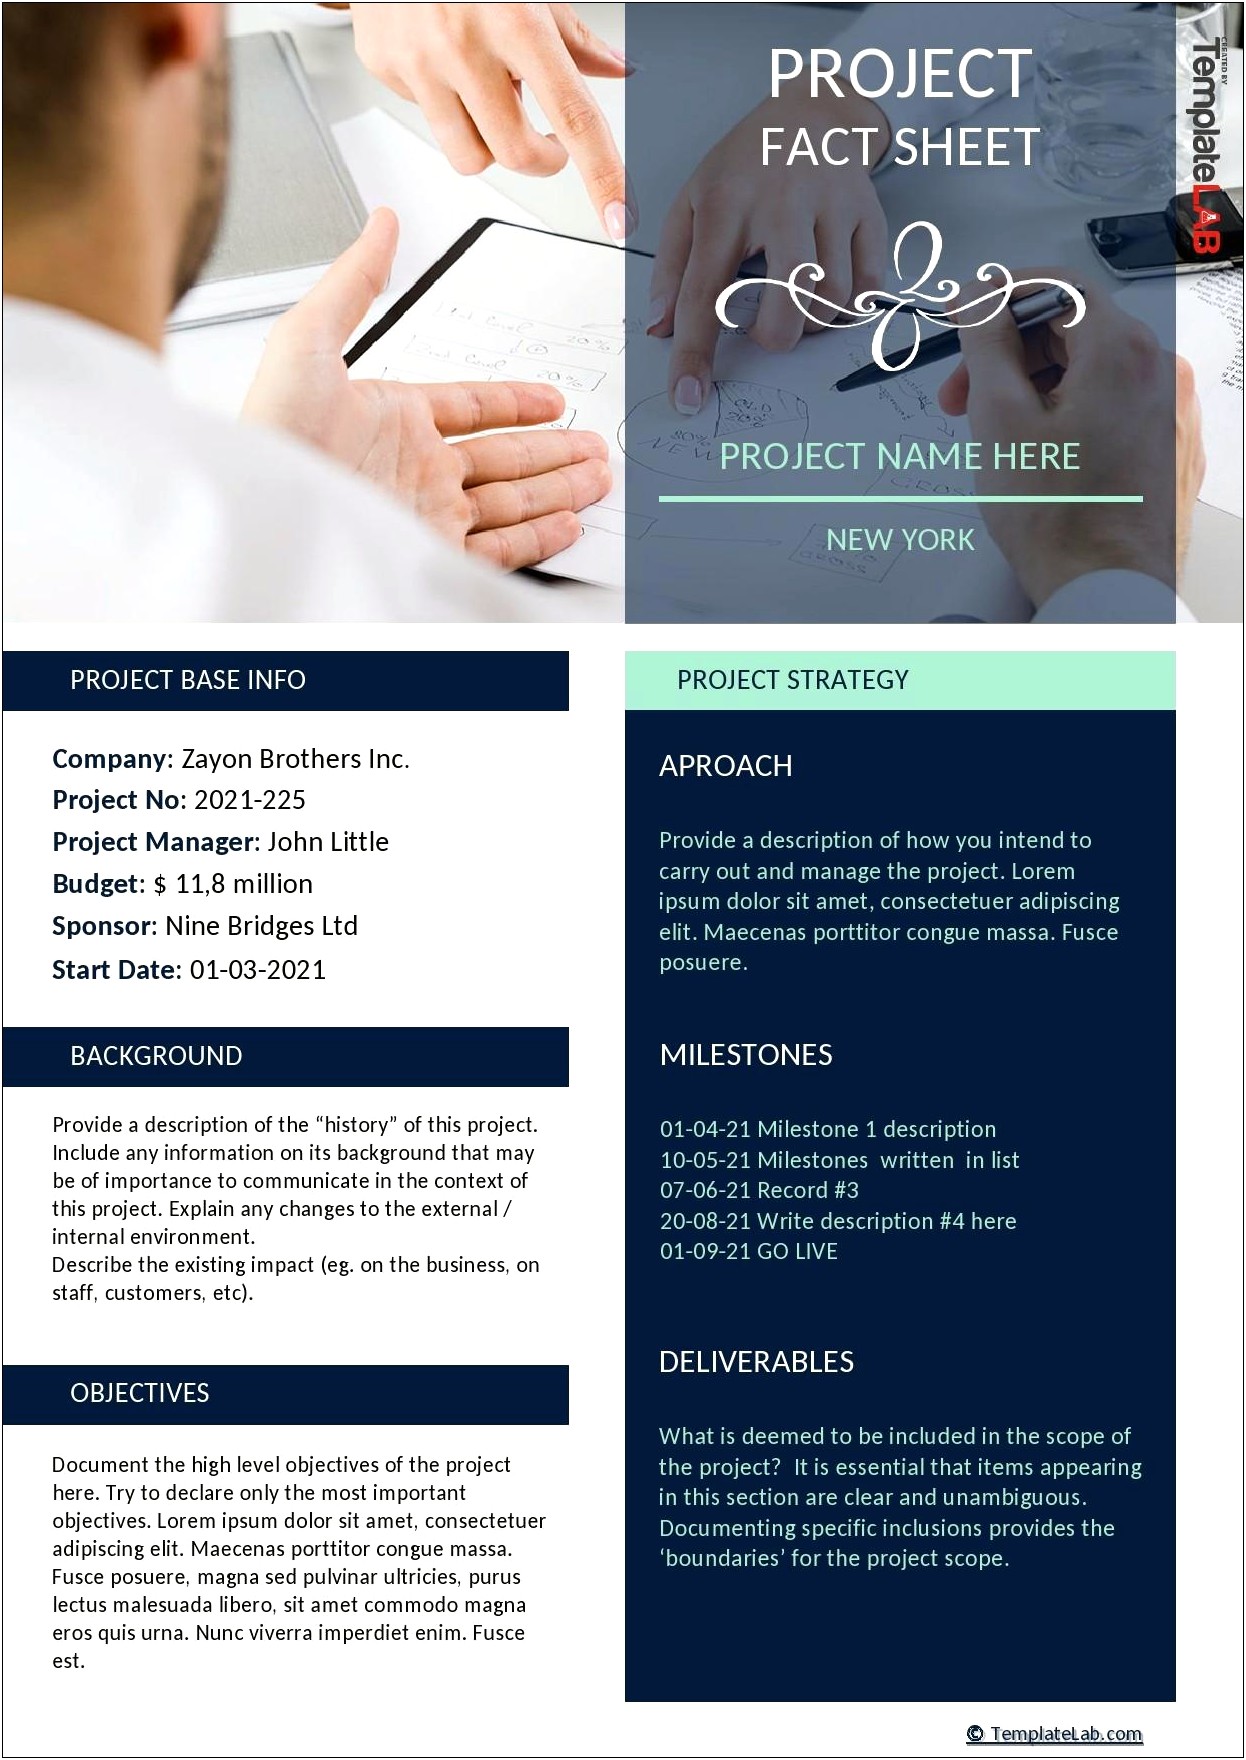 Free Microsoft Template For Fact Sheet Medical